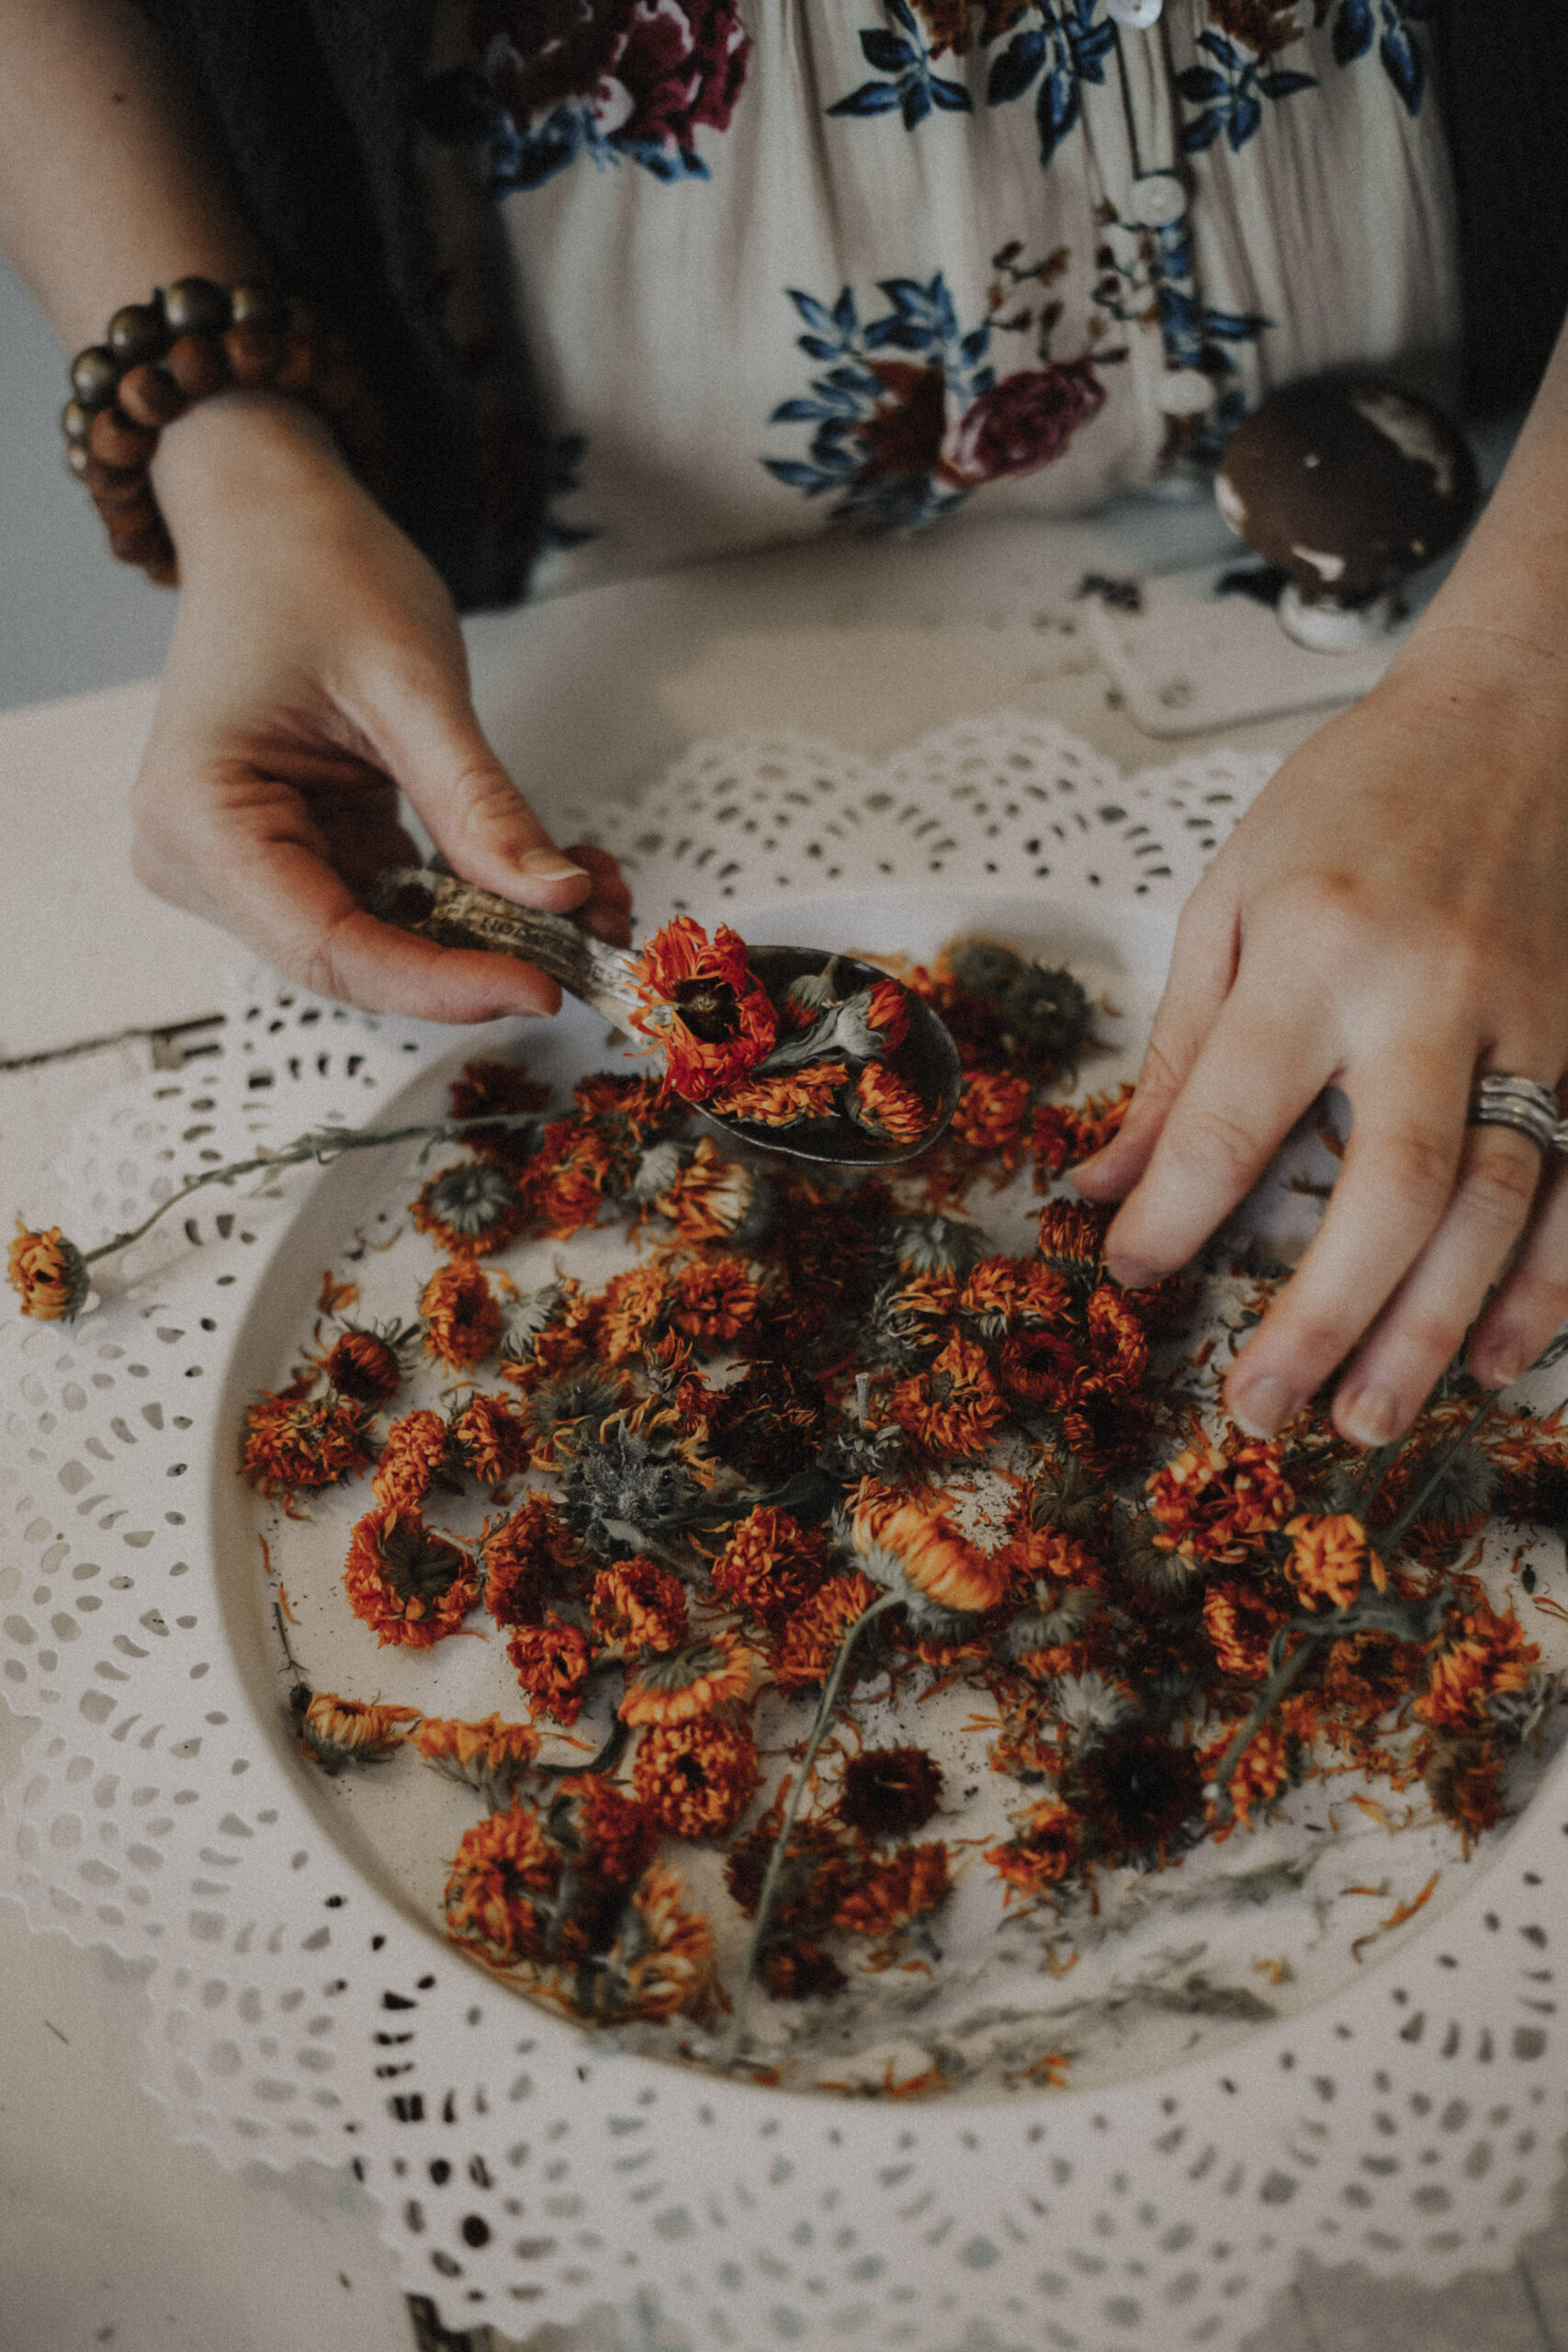 Close-up of hands preparing dried orange flowers on a white lace doily.